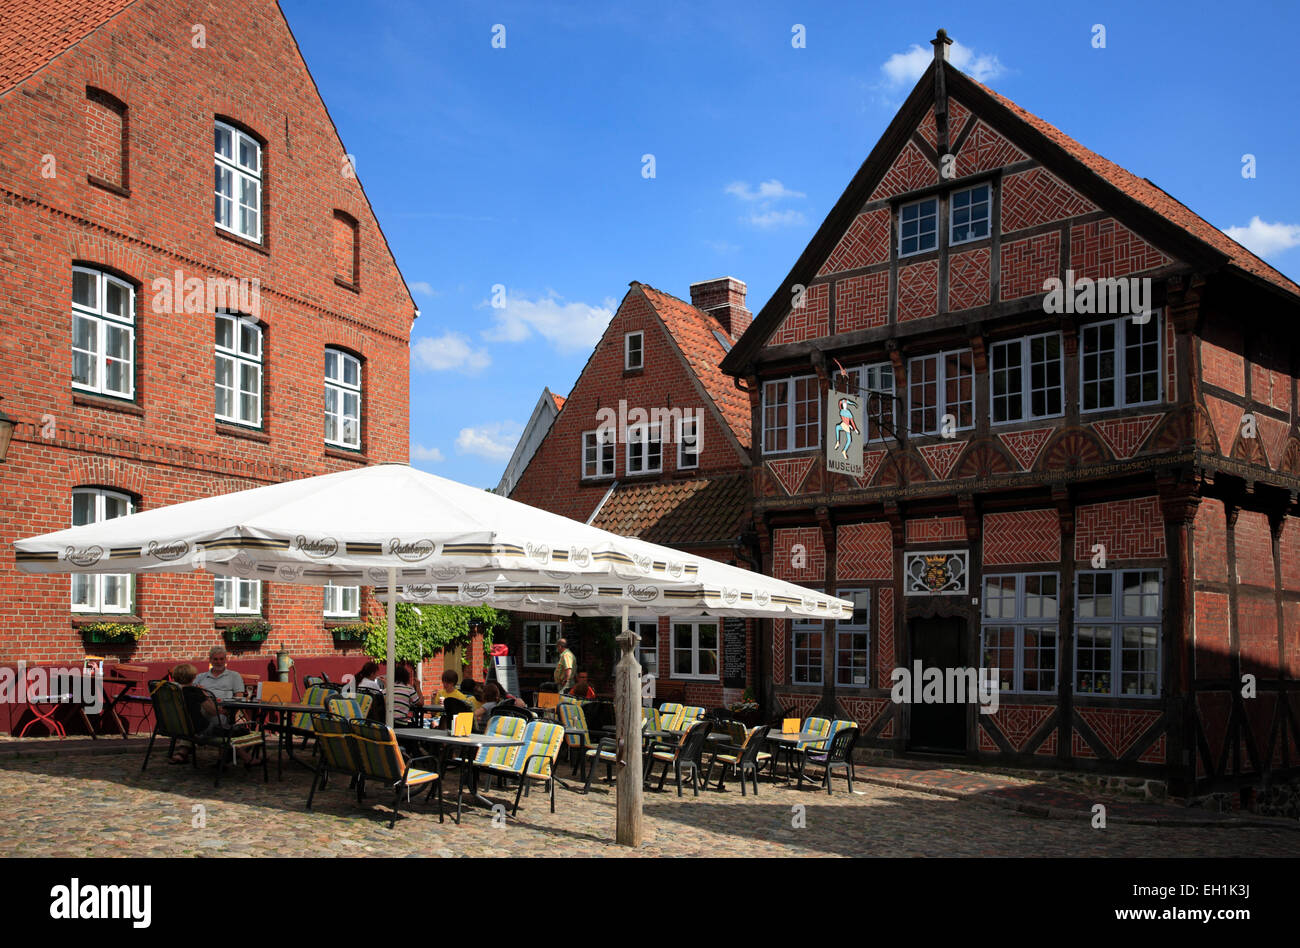 Framed houses and cafe at market square, Moelln, Schleswig-Holstein, Germany, Europe Stock Photo